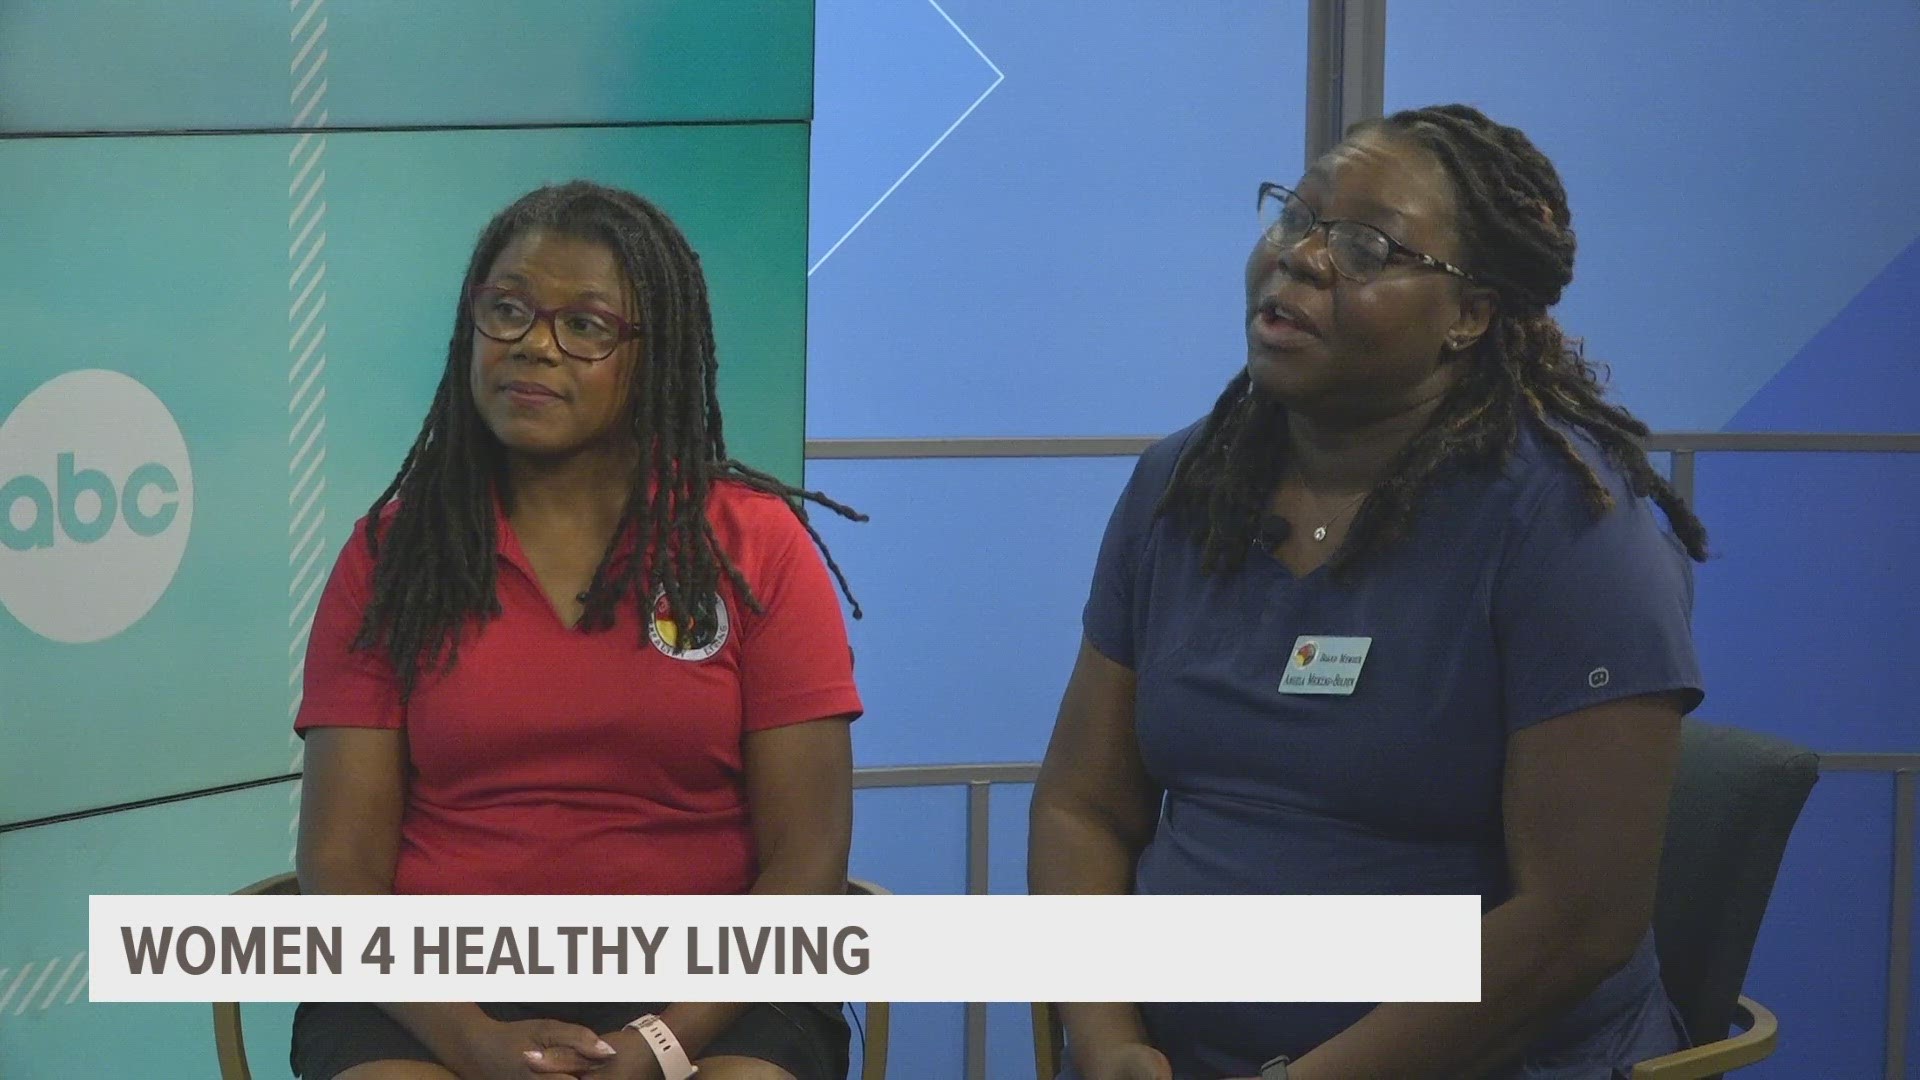 Hear from Angela Mickens-Bolden and Brandi Miller from Black Women 4 Healthy Living.